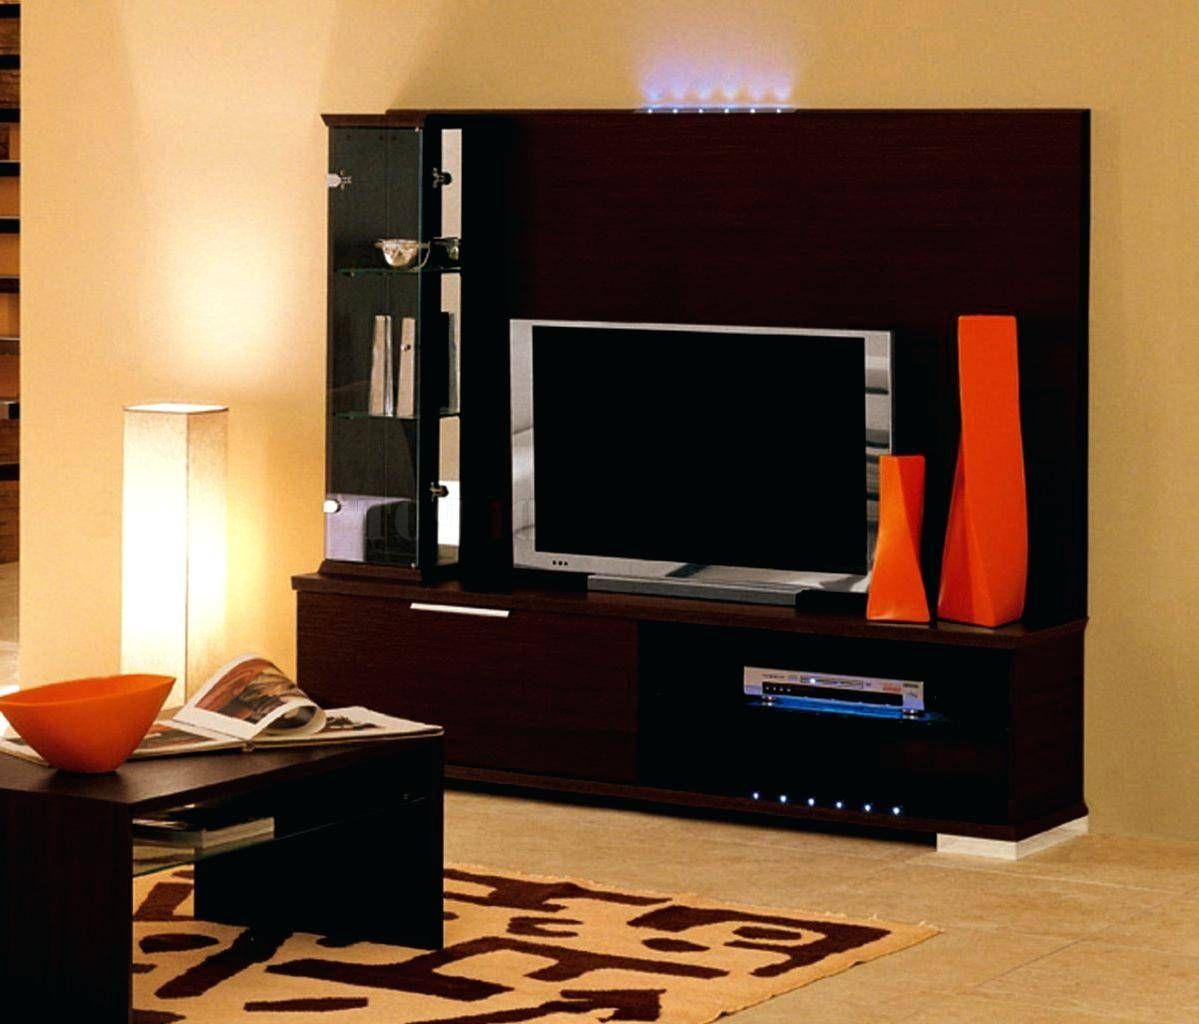 Tv Stand : Terrific Tv Cabinet Sorry Your Browser Does Not Support With Regard To 24 Inch Tall Tv Stands (View 8 of 15)